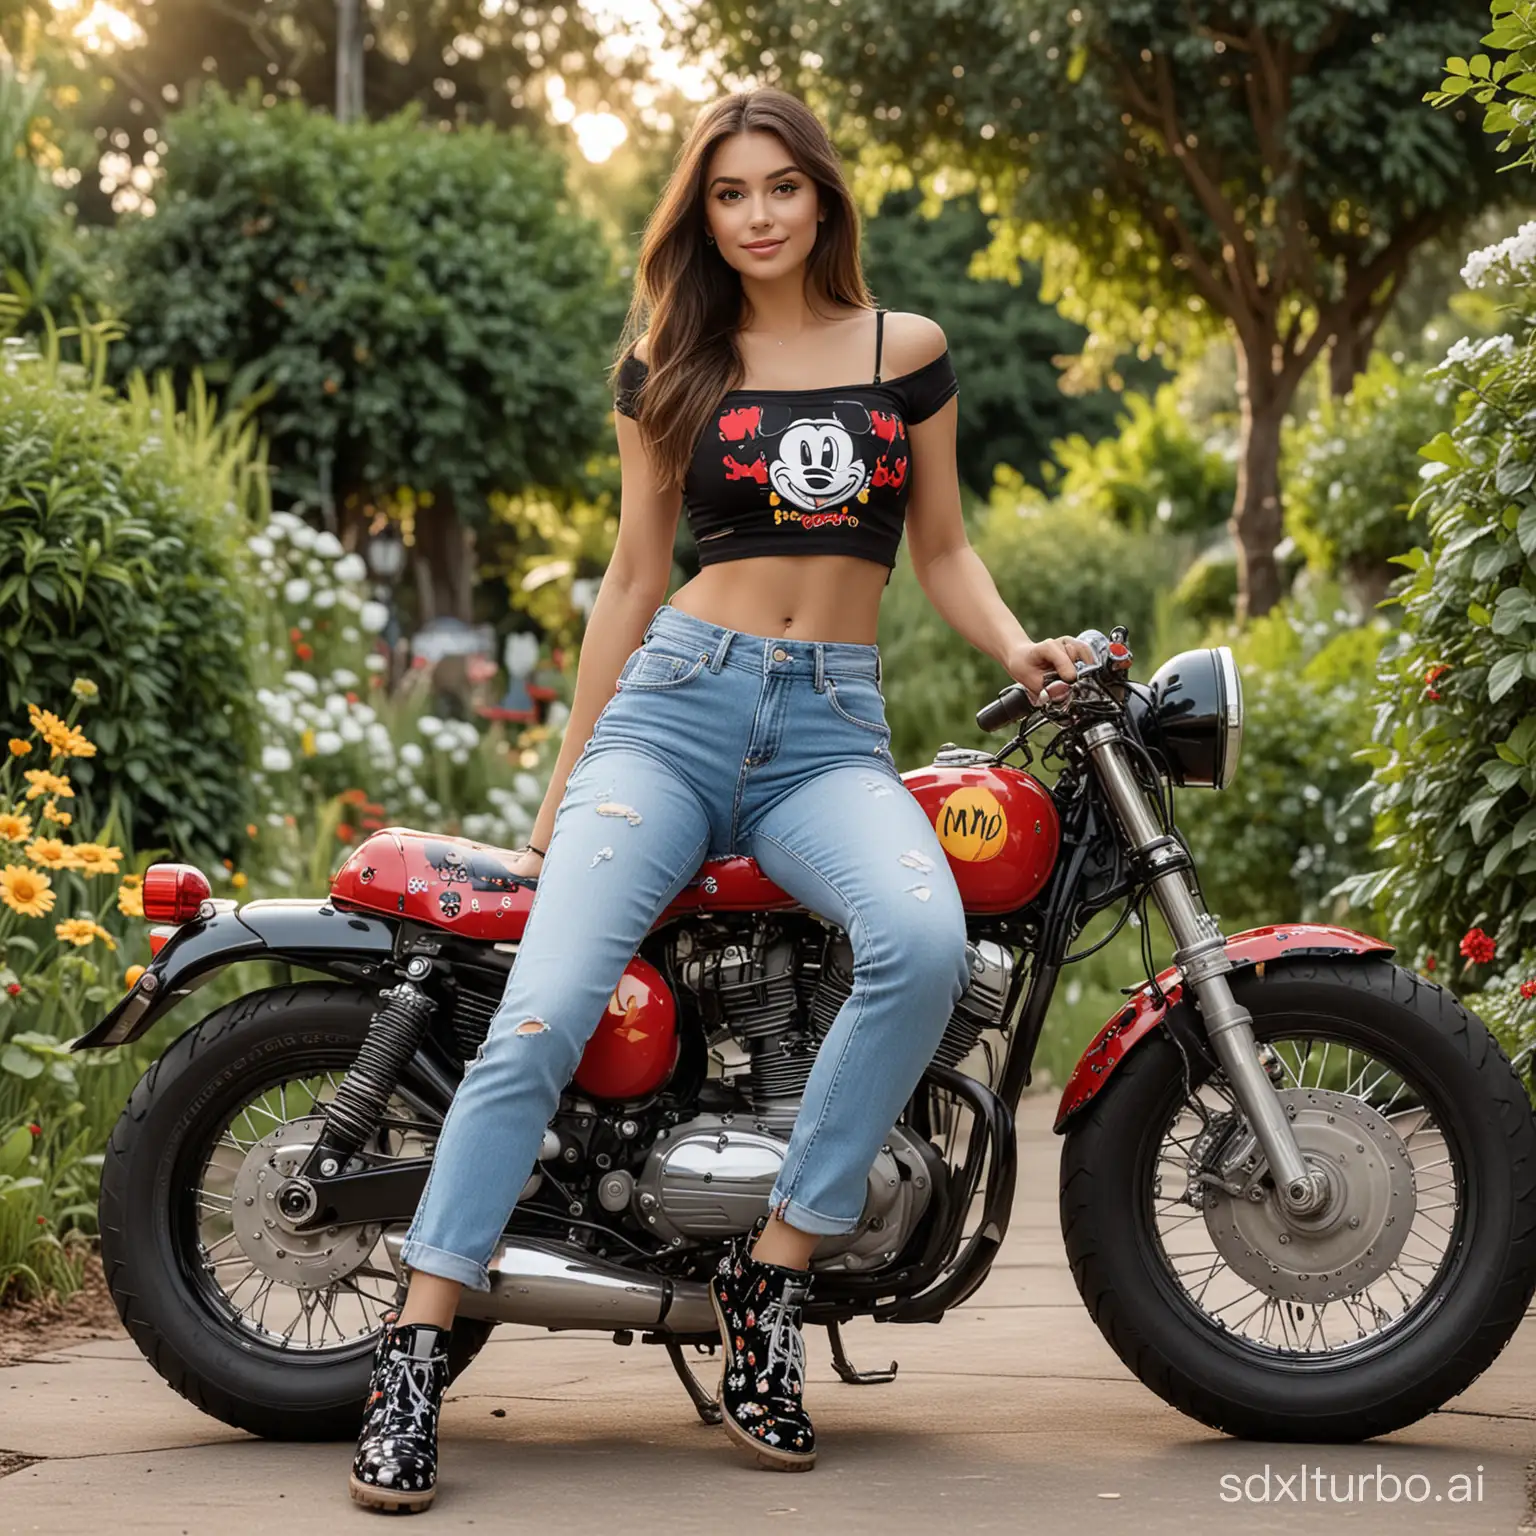 Captivating-Woman-in-Mickey-Mouse-Crop-Top-on-Motorcycle-in-Garden